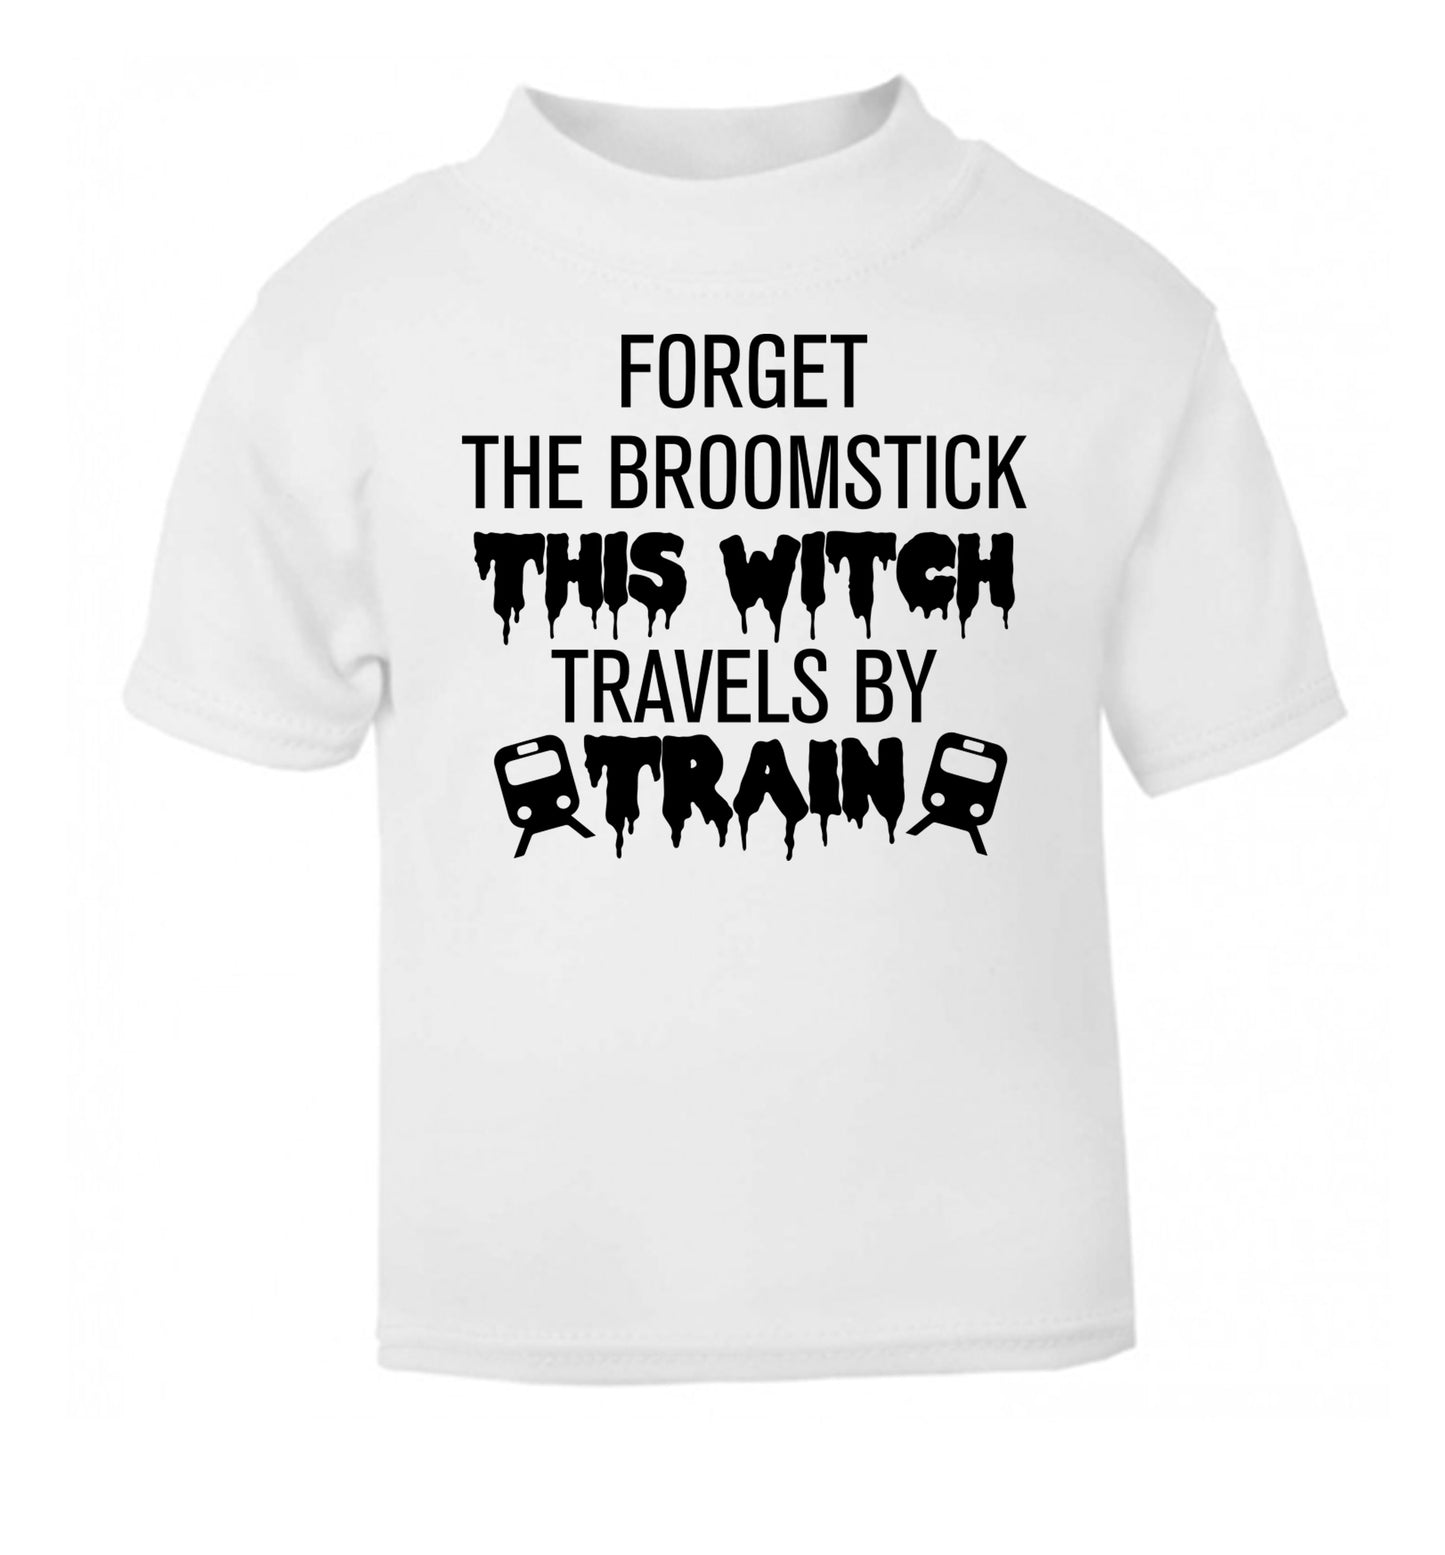 Forget the broomstick this witch travels by train white Baby Toddler Tshirt 2 Years